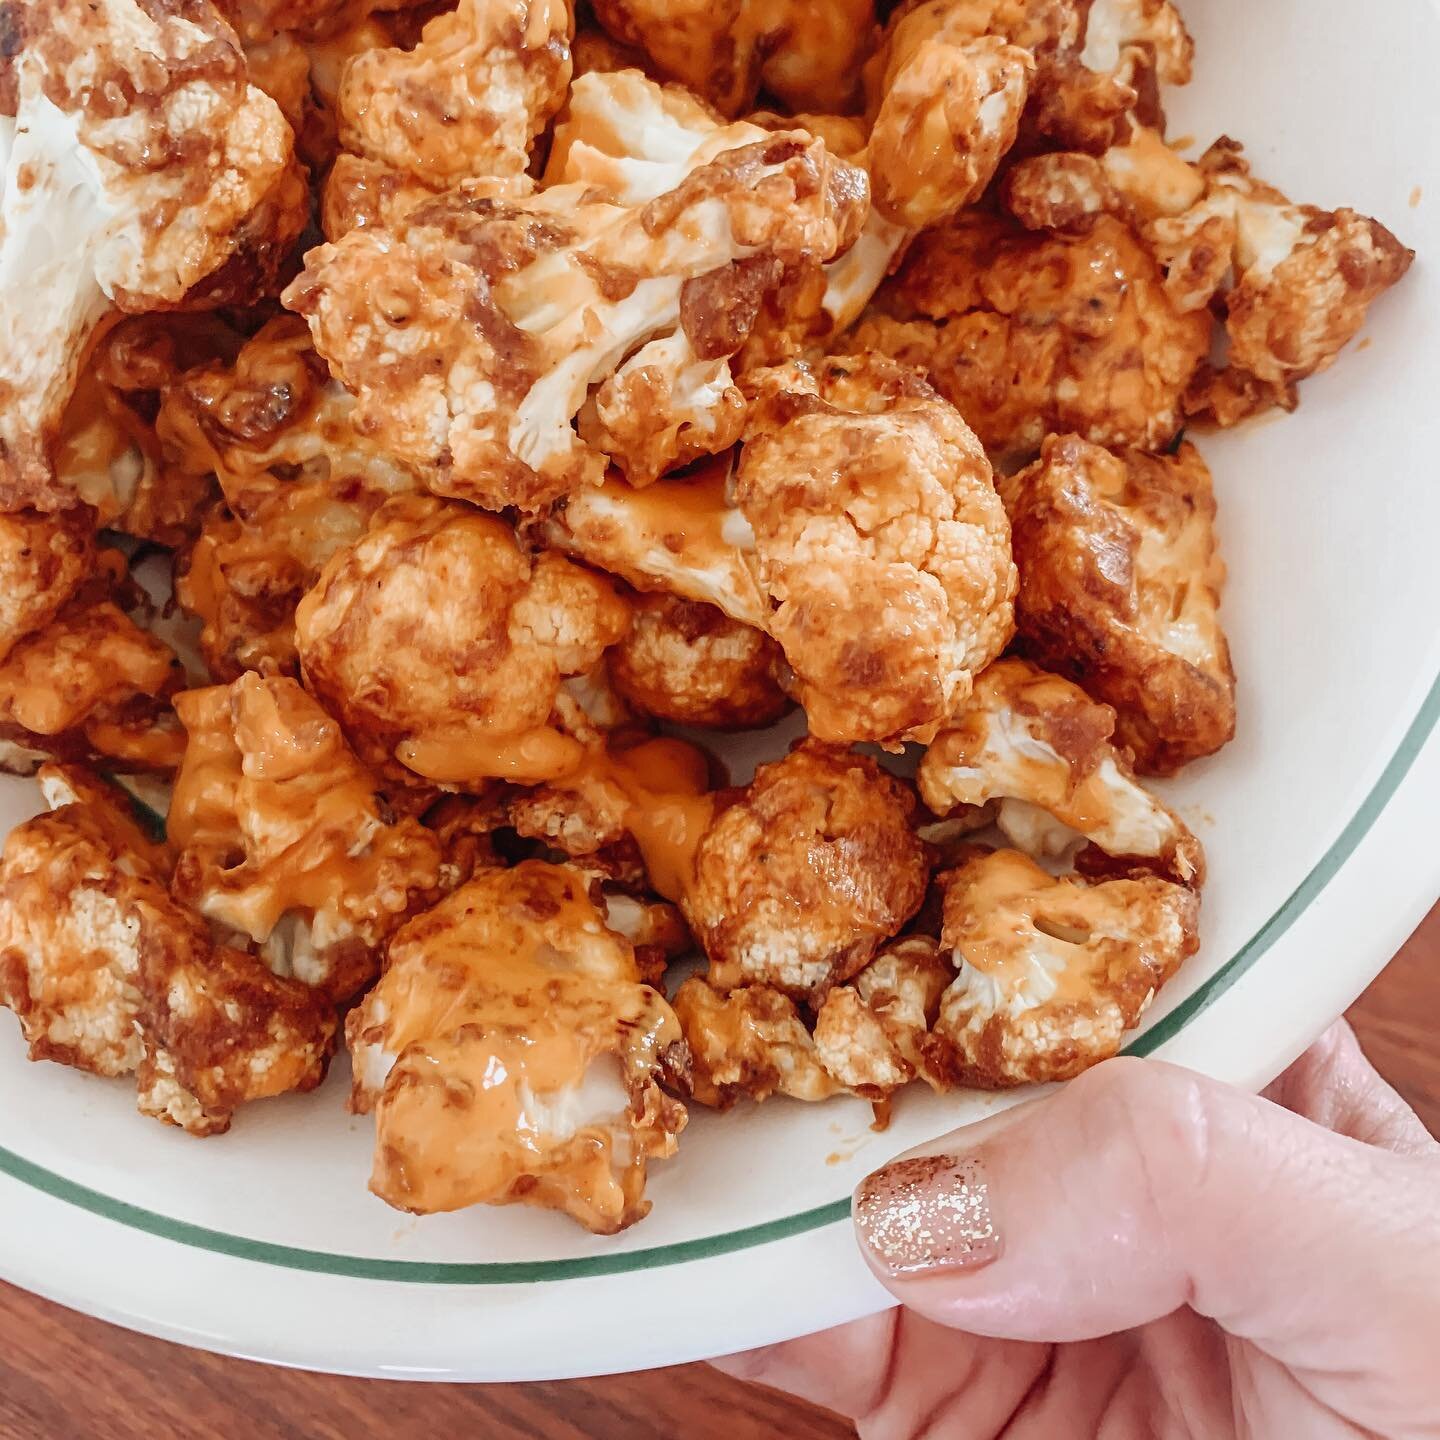 Homemade Buffalo cauliflower. 🤤 guess the cravings don&rsquo;t go away postpartum!

Preheat oven to 425. Separate one head of cauliflower into florets. 

Mix:
1/3 cup whole wheat flour
1/3 cup water
1 tsp smoked paprika
1/4 tsp salt

Toss cauliflowe